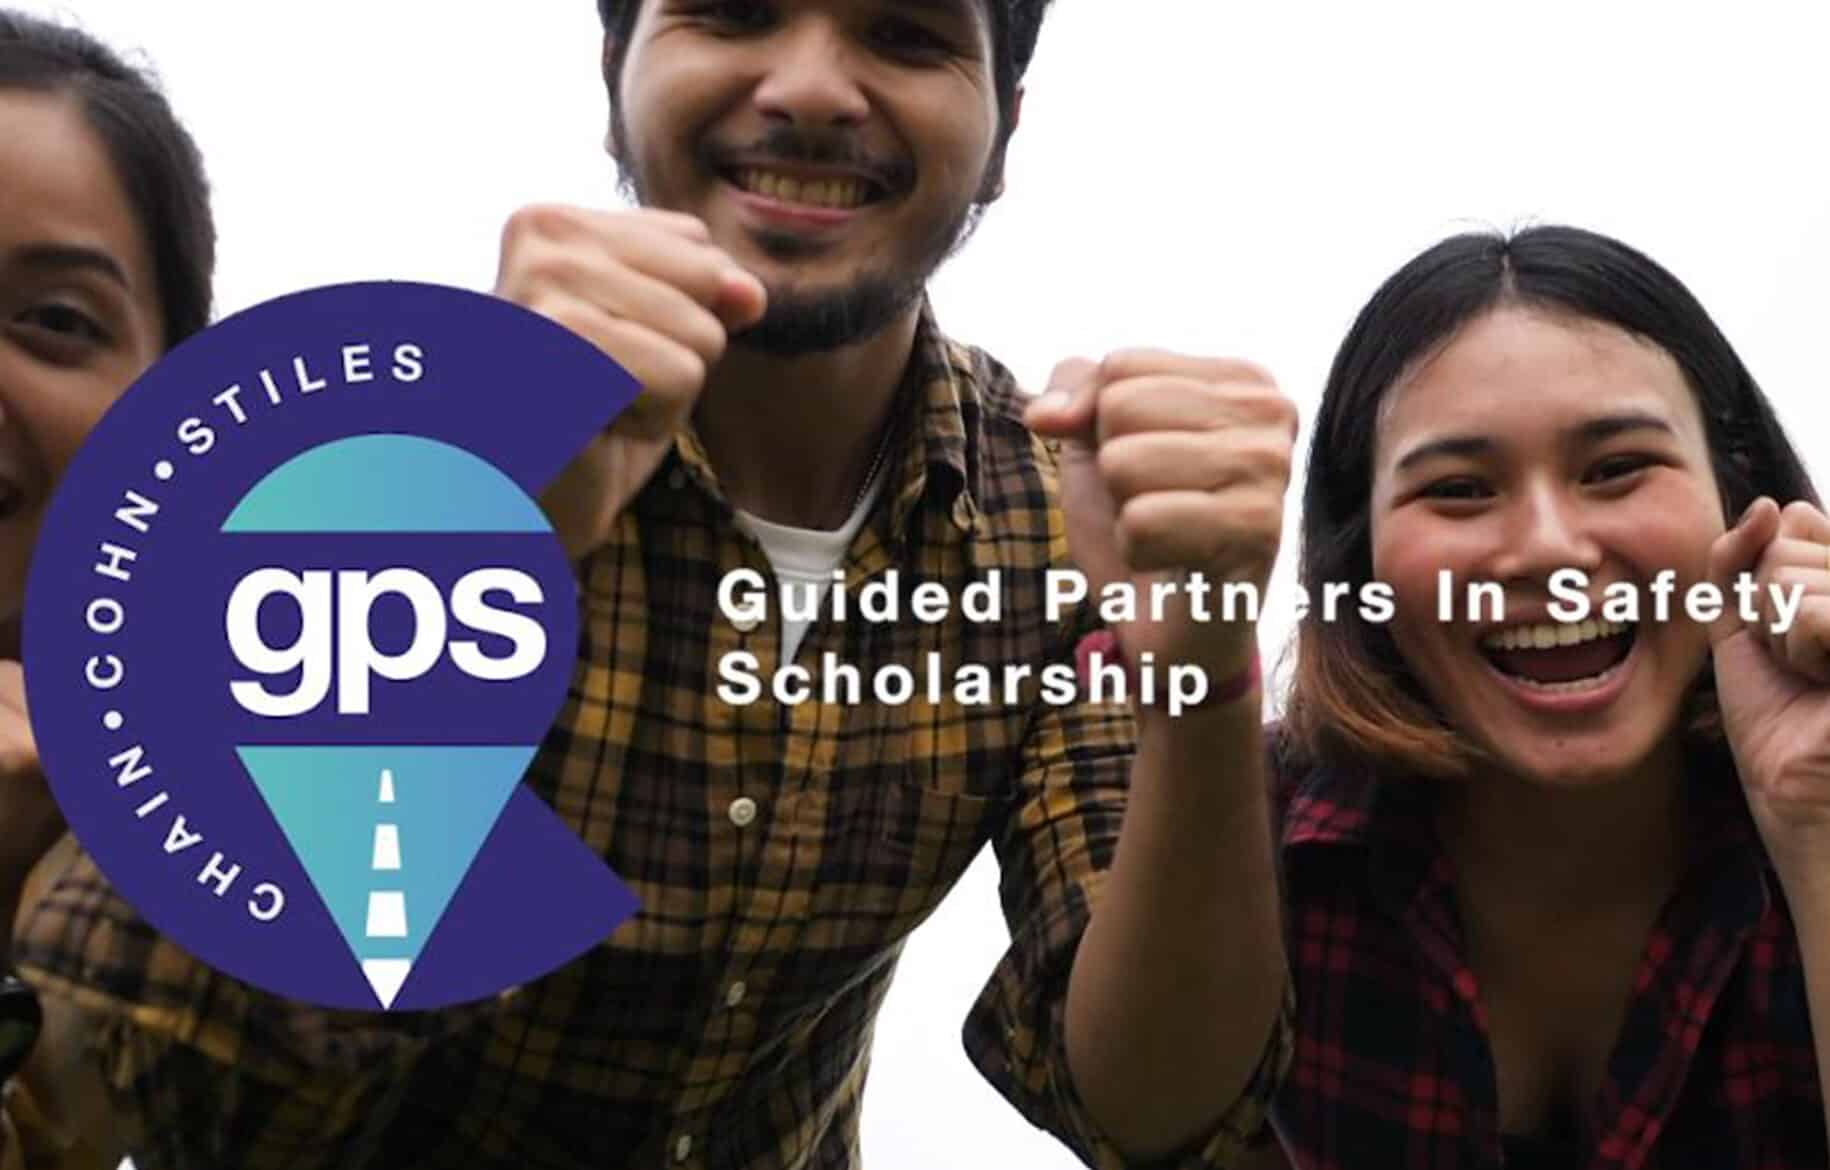 Chain | Cohn | Clark awards 11 drivers education scholarships in new ‘Guided Partners in Safety’ (GPS) program